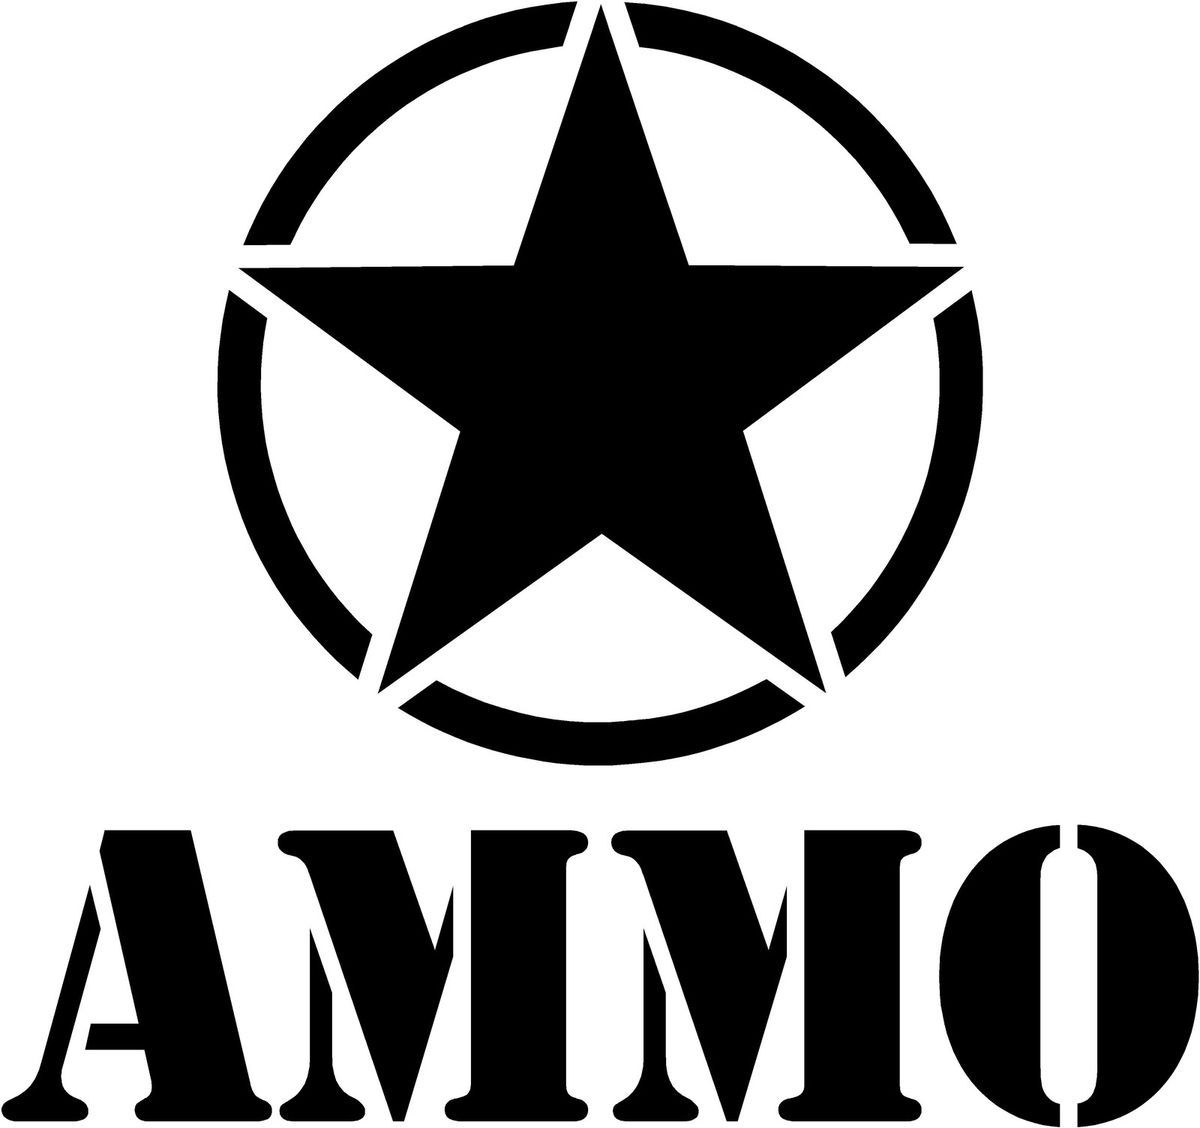 Army Star Ammo Decal 3 75x4 Select Your Color